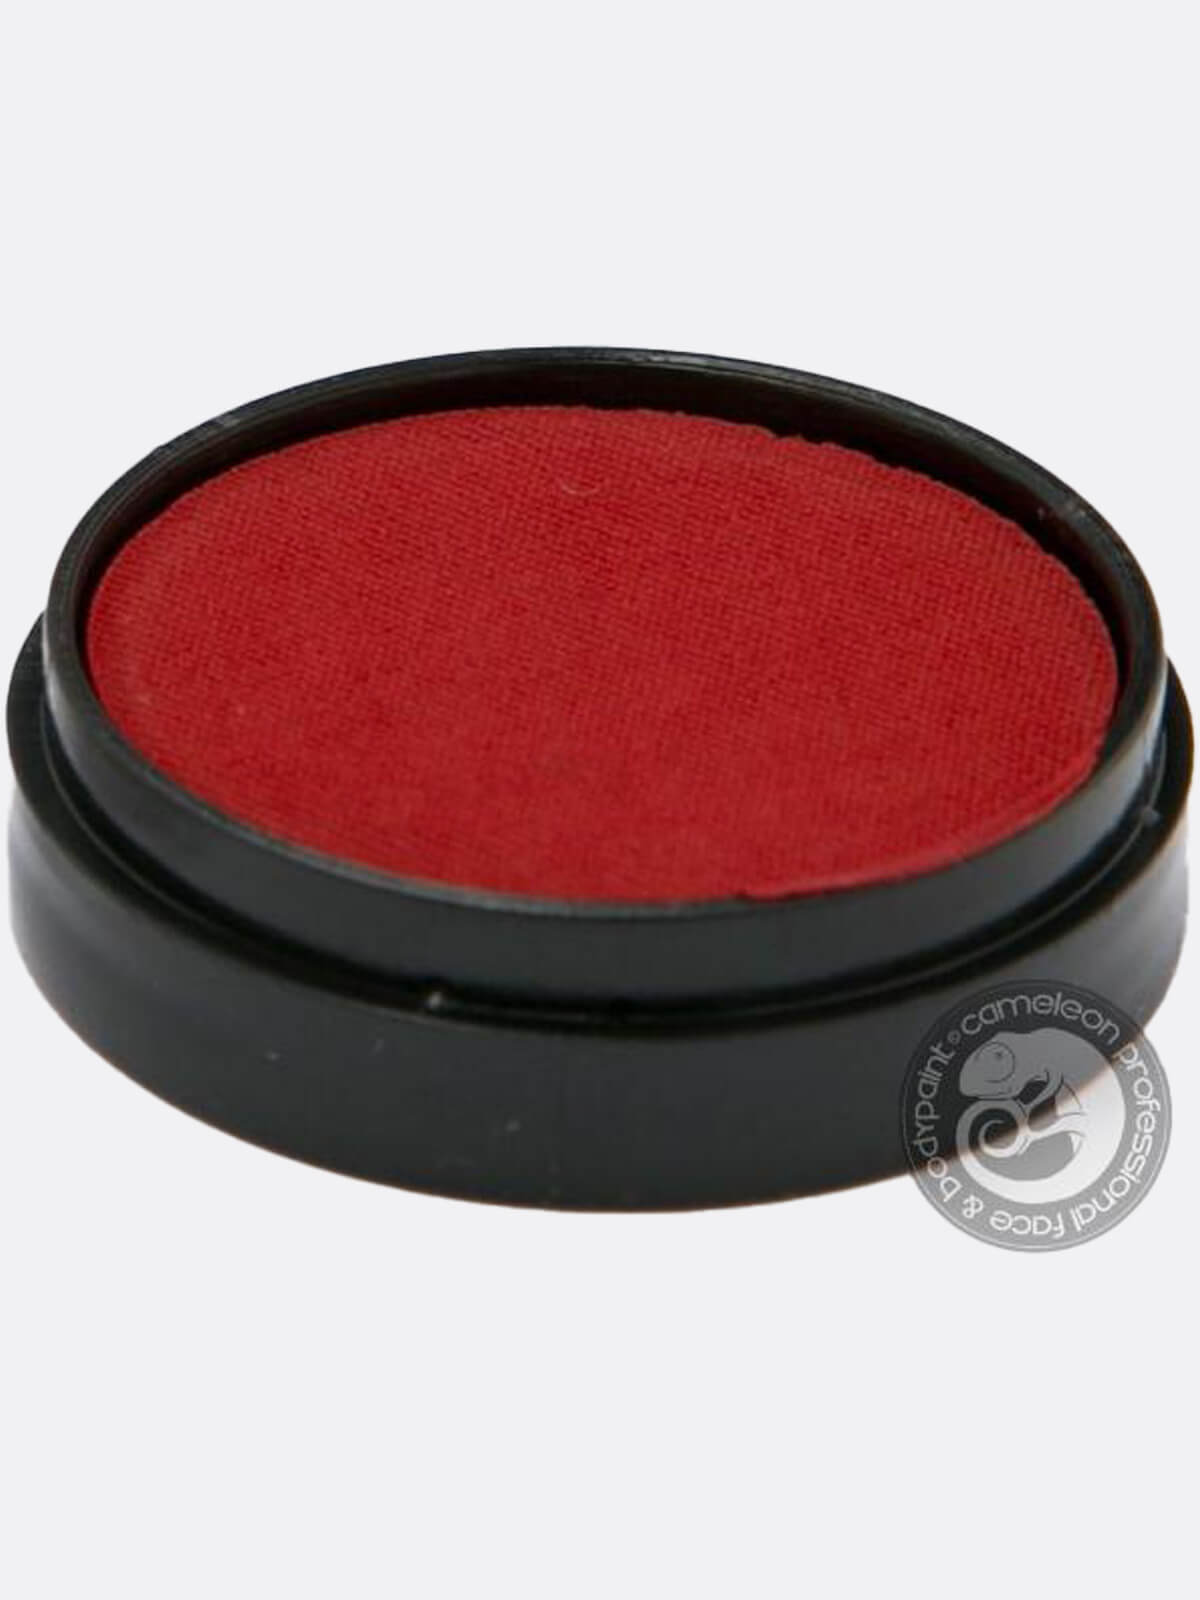 Blood Red Face Paint by Cameleon